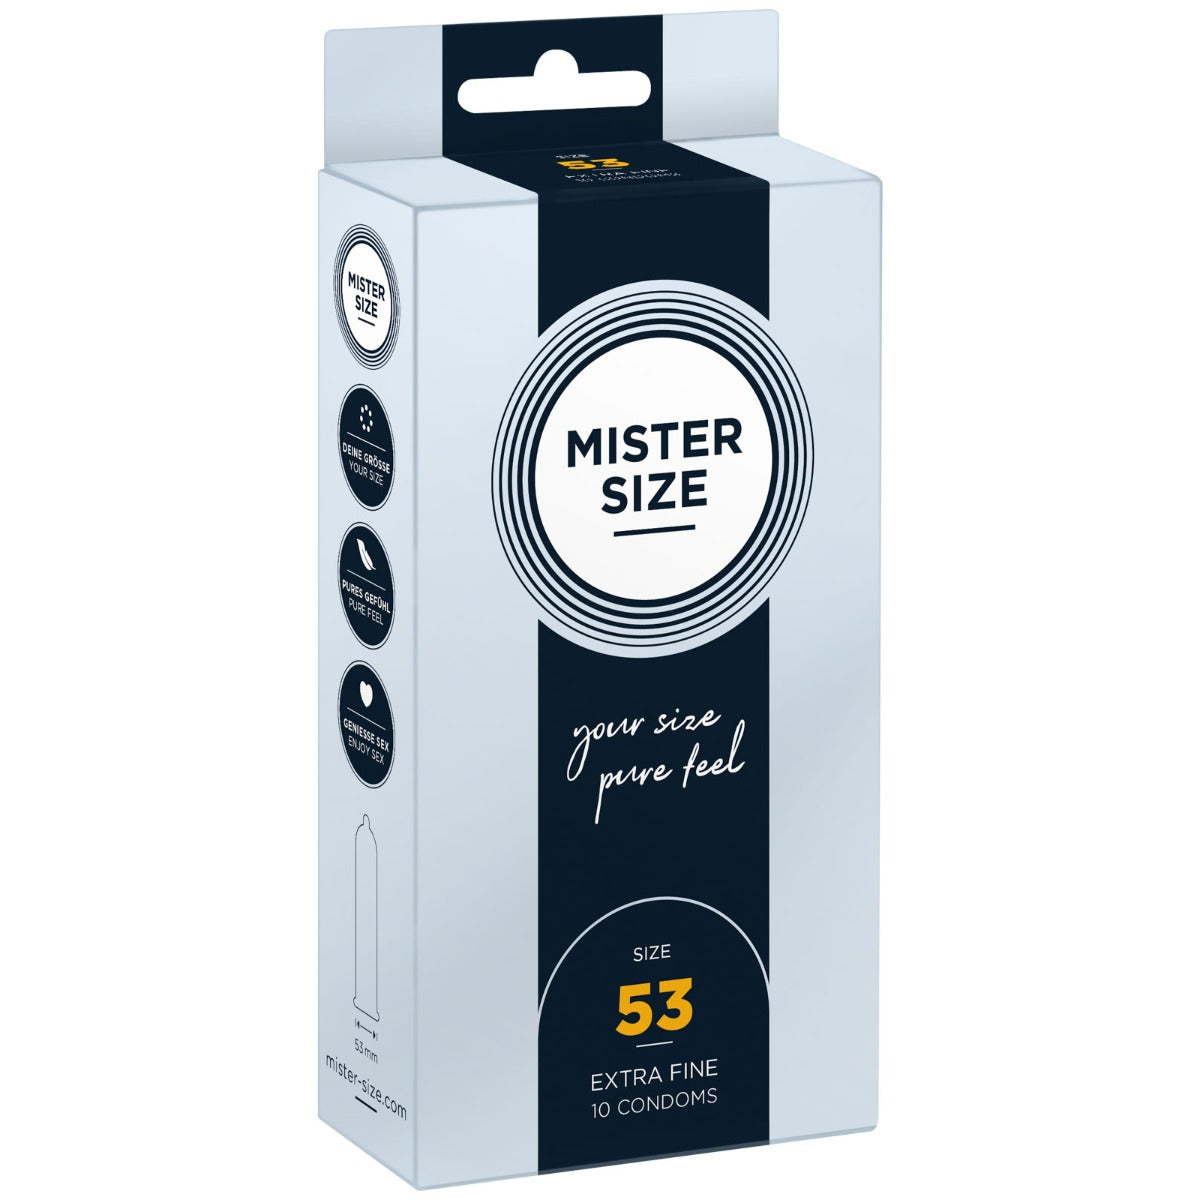 MISTER SIZE | Pure feel Condoms - Size 53 mm (10 pack)